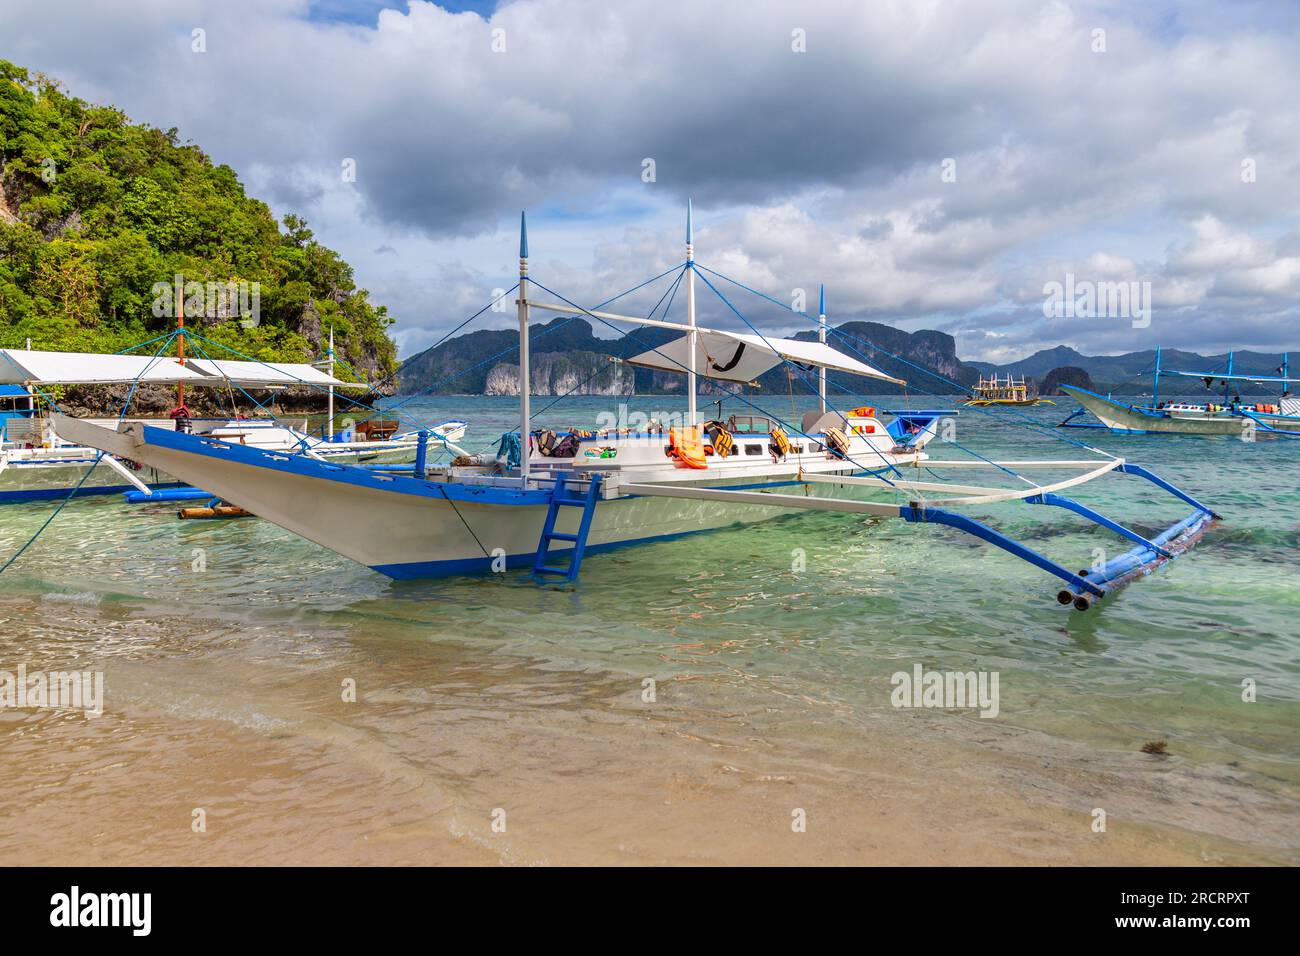 Tropical island landscape with bangca traditional phillipinians boats anchored at the shore, Palawan, Philippines Stock Photo